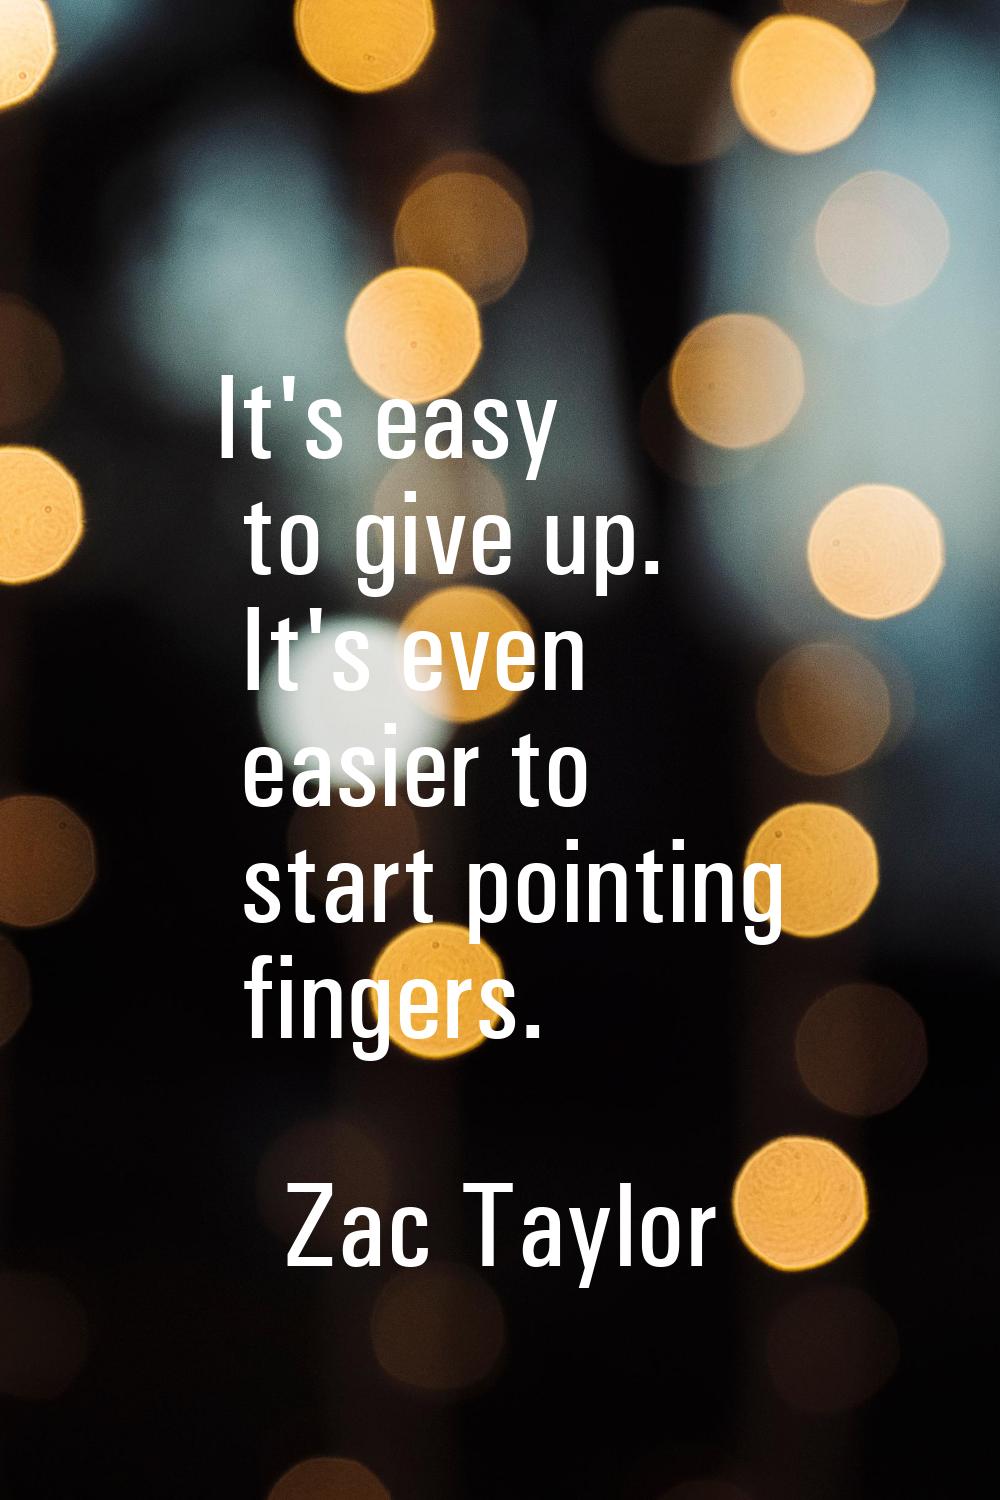 It's easy to give up. It's even easier to start pointing fingers.